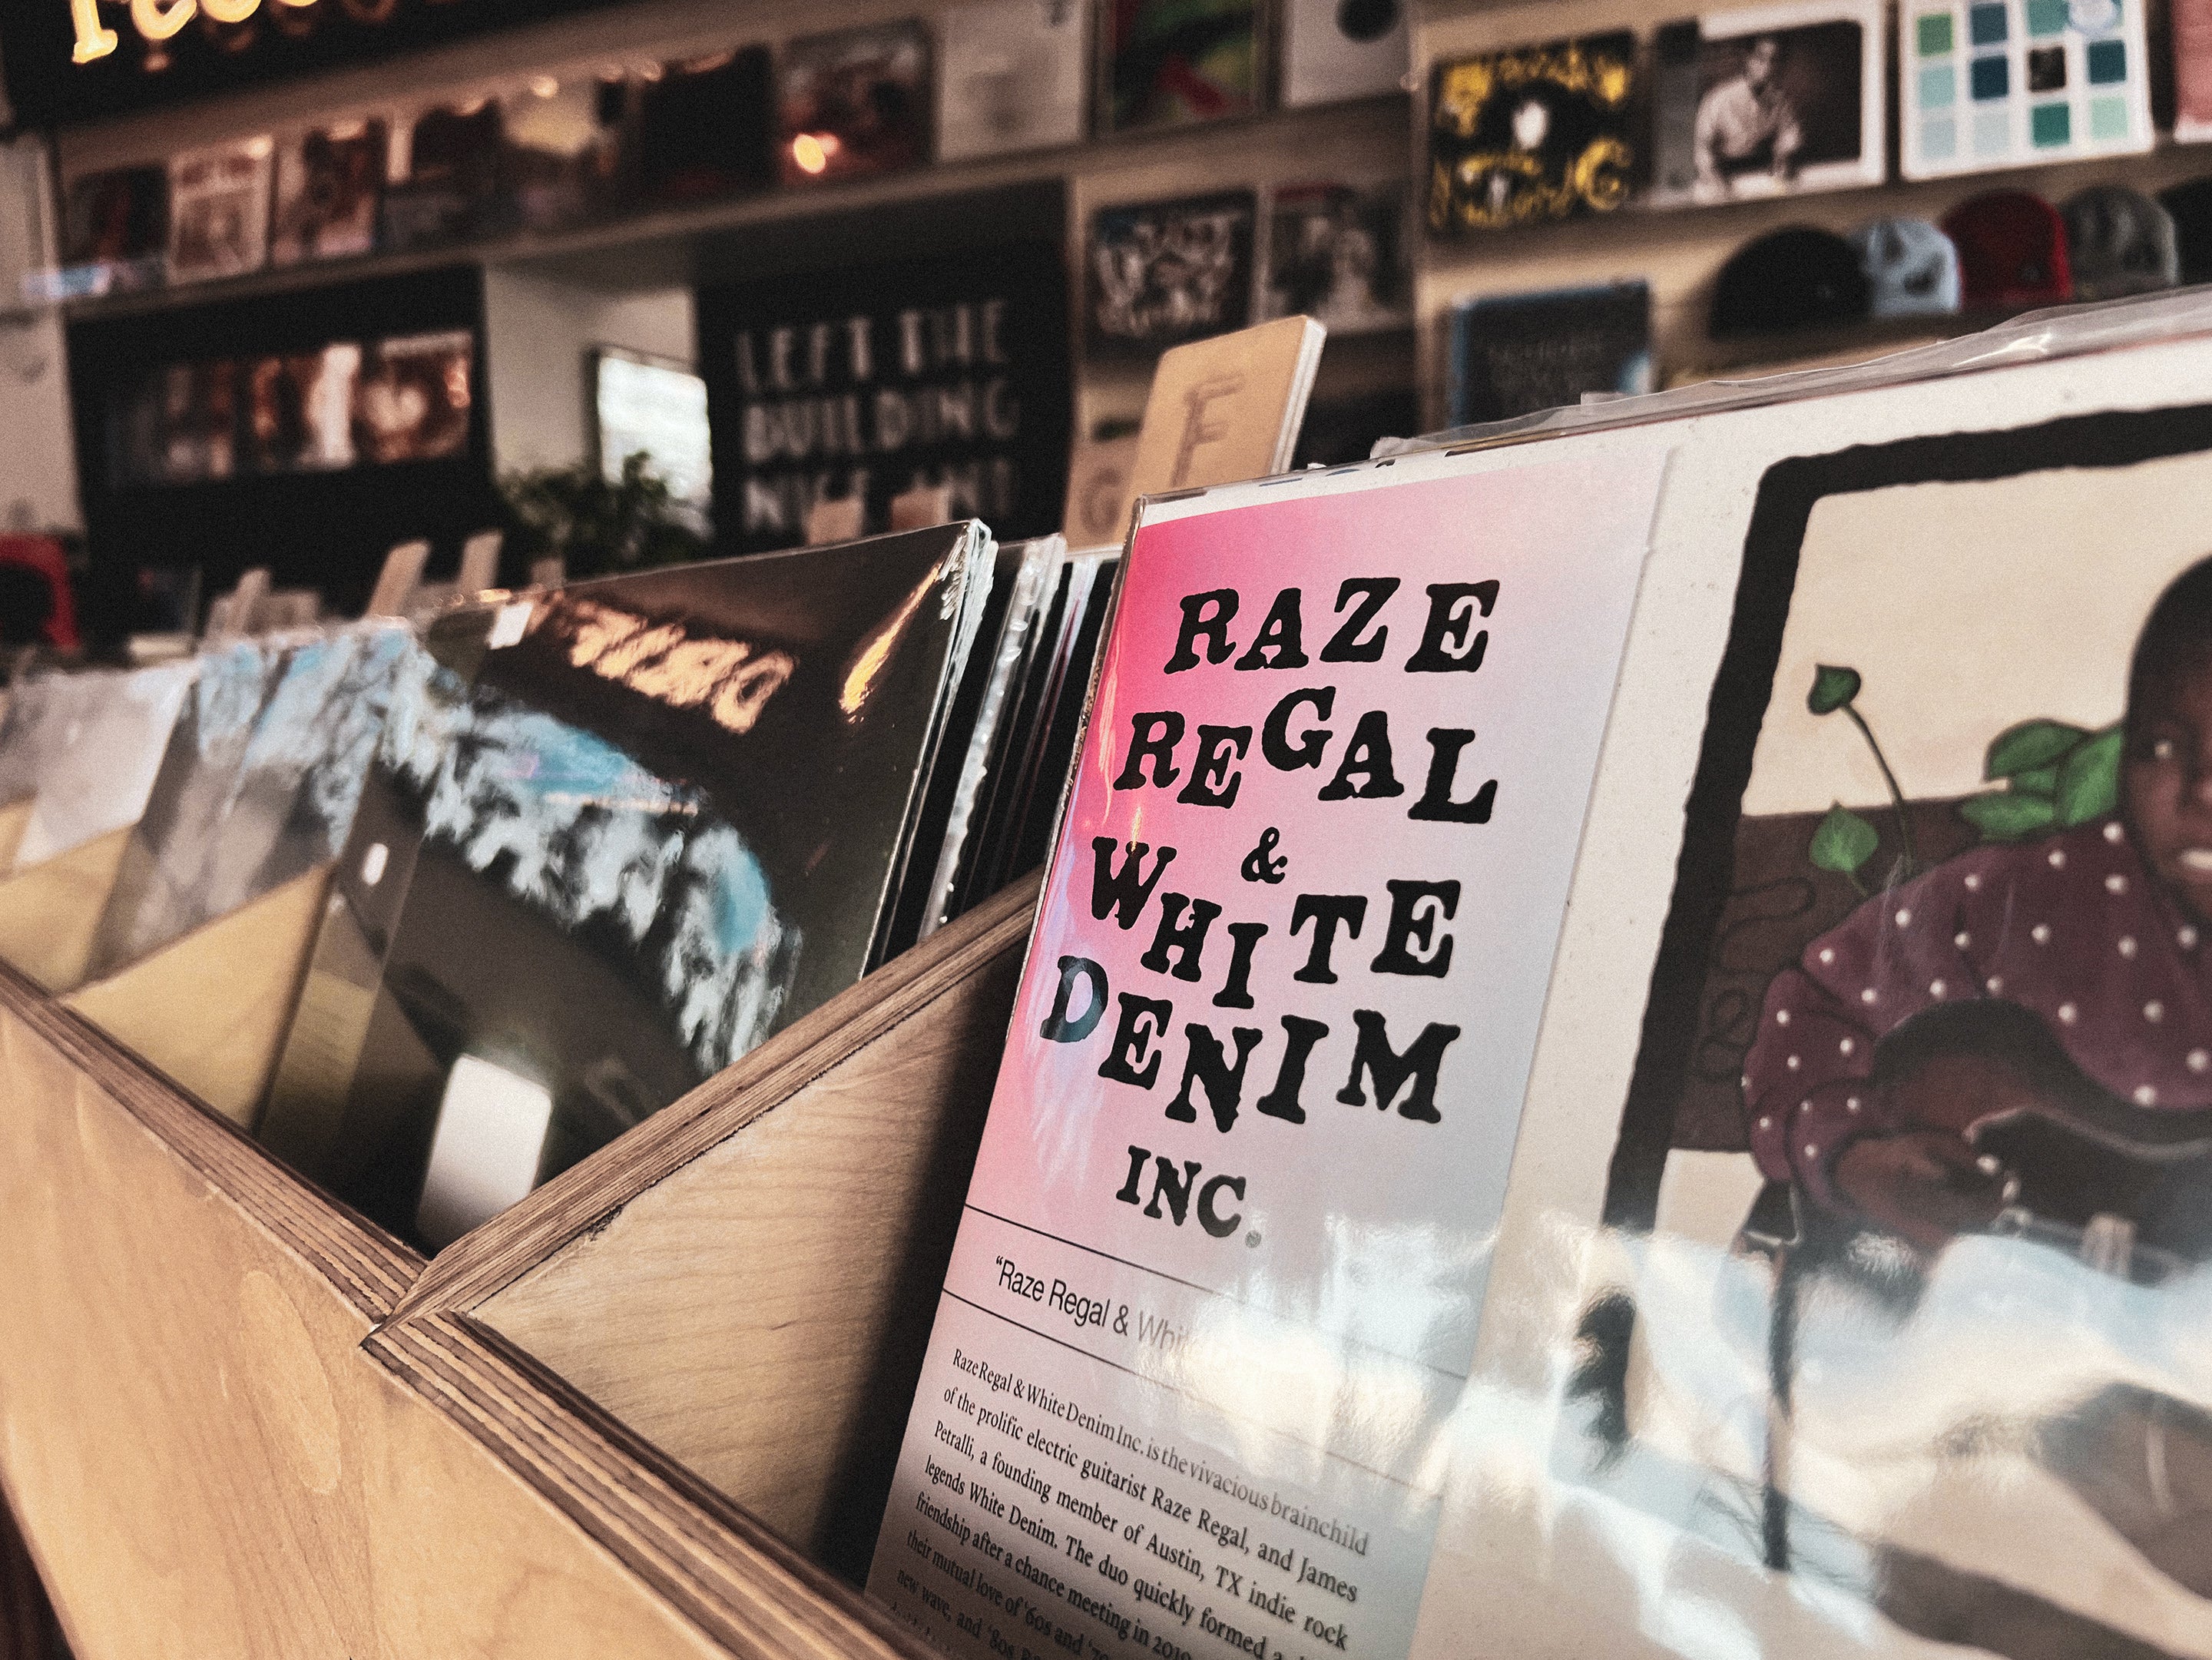 Records of the Week: Raze Regal & White Denim Inc., O., Smoke DZA and Flying Lotus, Meadow Meadow, Ghost Woman and HONESTY.